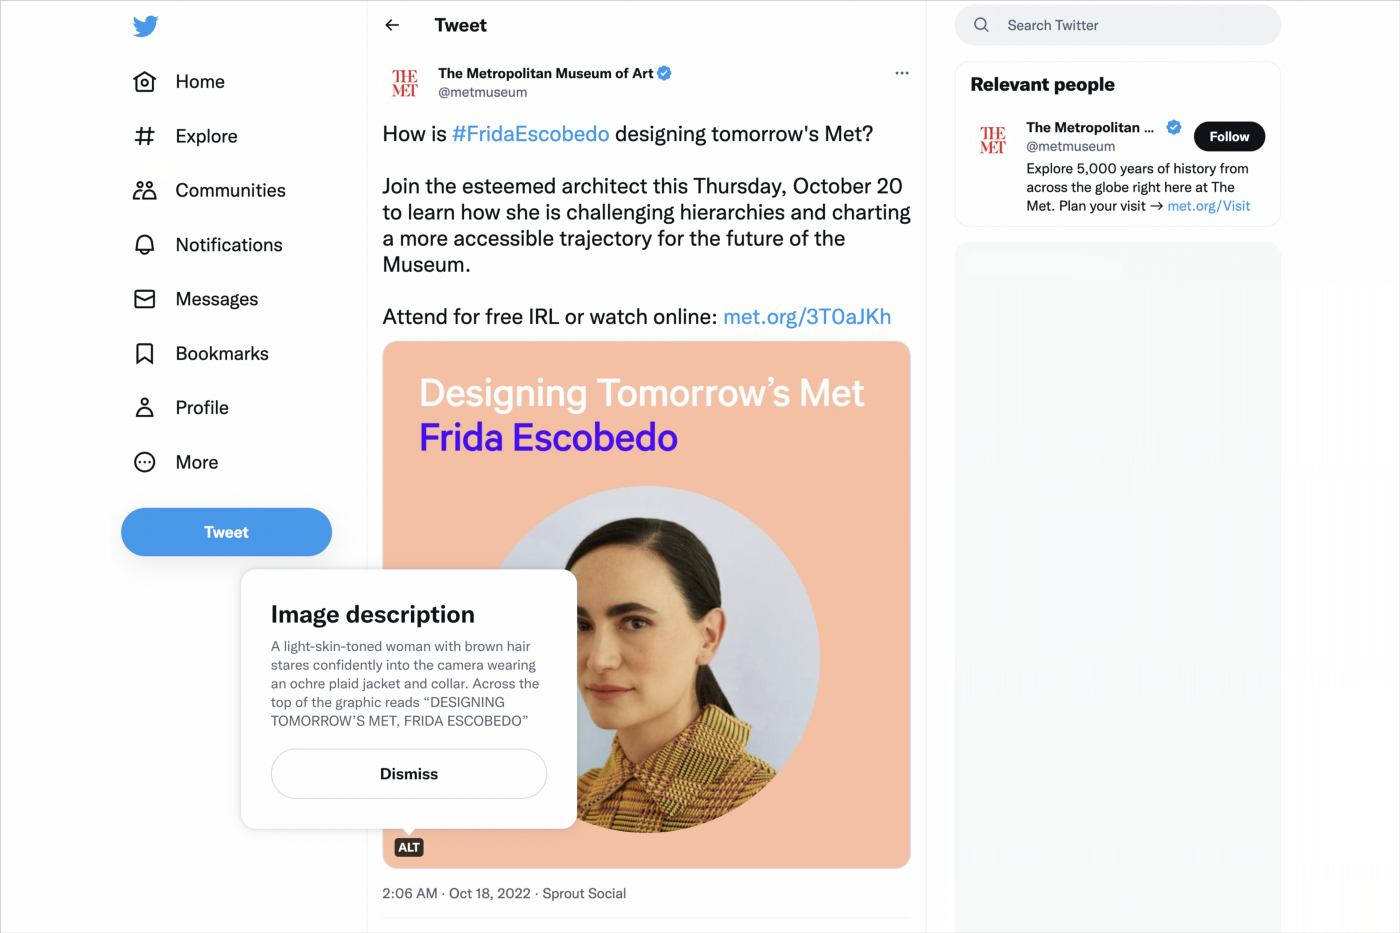 The Metropolitan Museum’s tweet about a talk by architect Frida Escobedo with her portrait and a detailed appearance description.